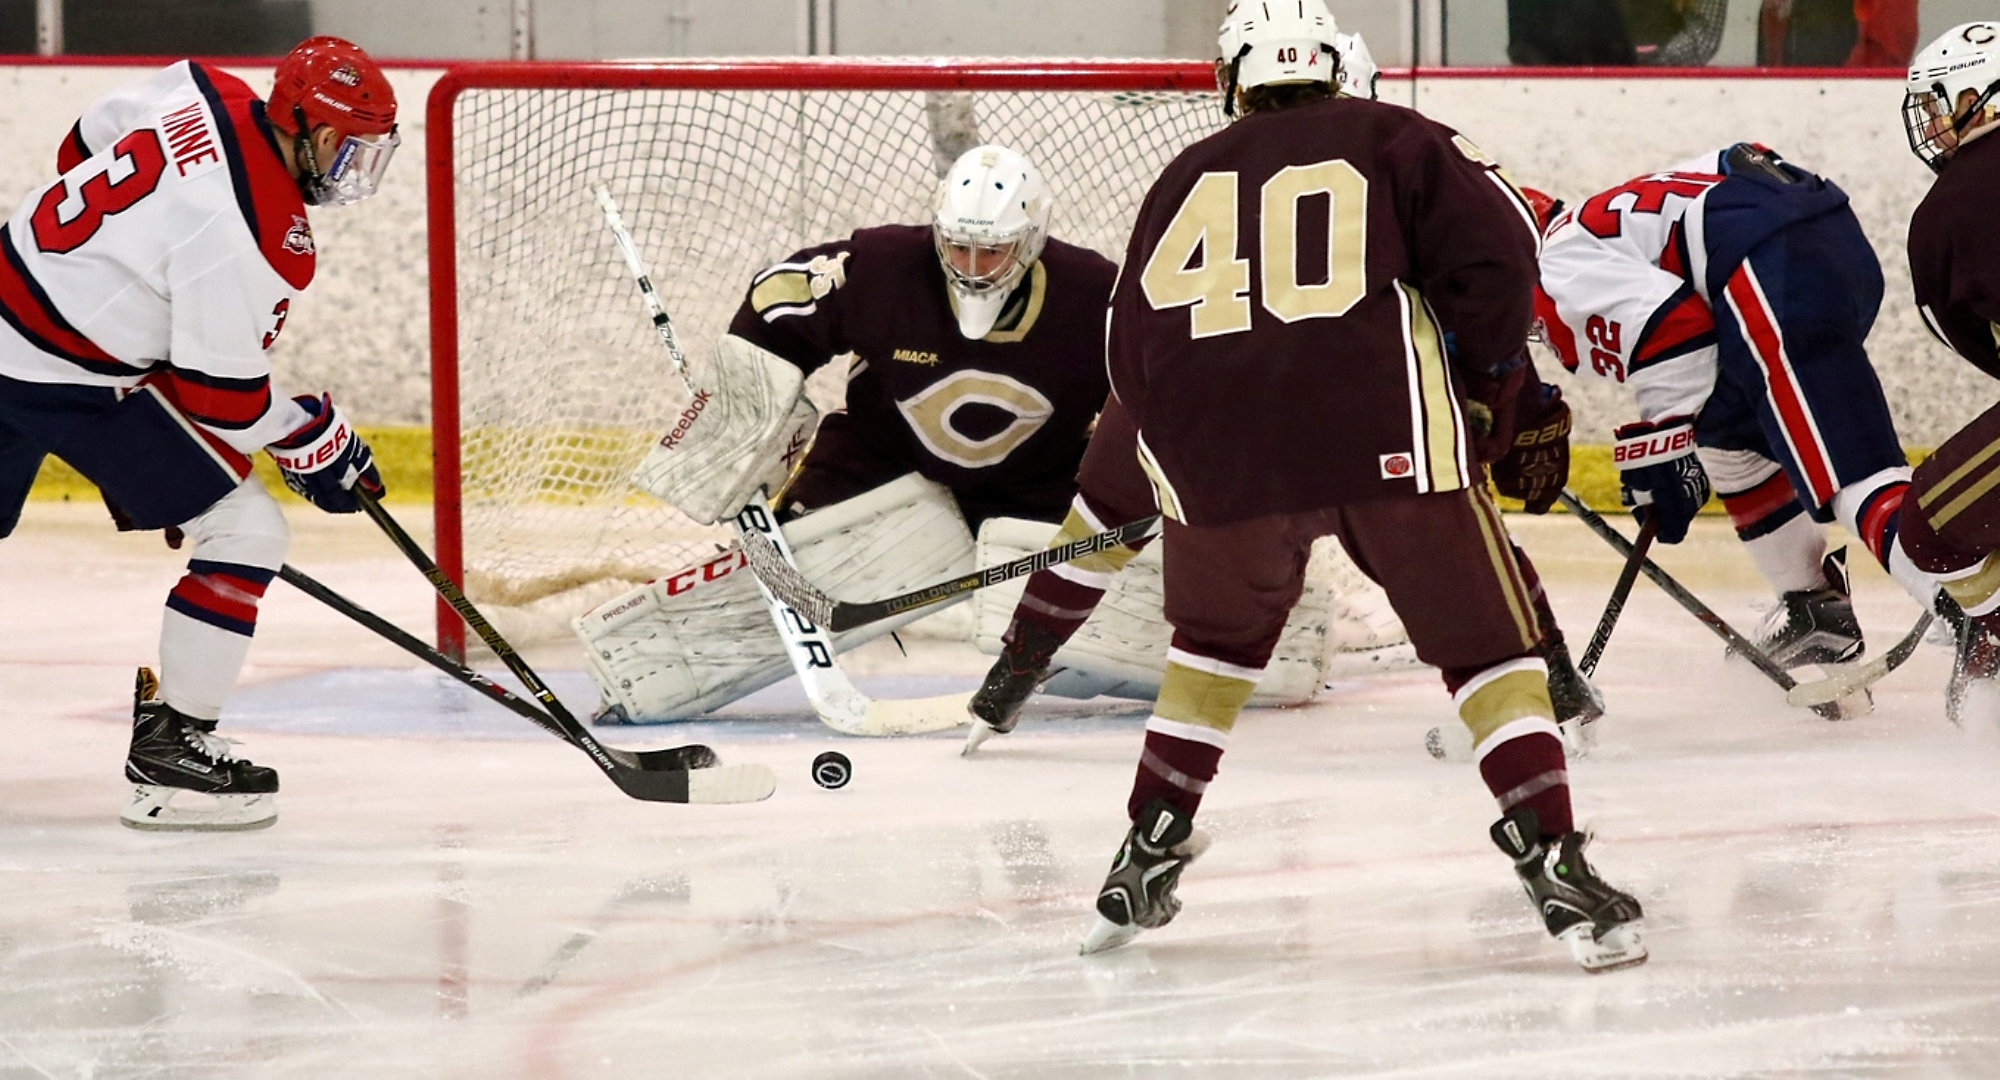 Freshman goalie Sam Nelson gets ready to make one of his 36 saves in the Cobbers' 5-1 win at St. Mary's. (Photo courtesy of Ryan Coleman, d3photography.com)